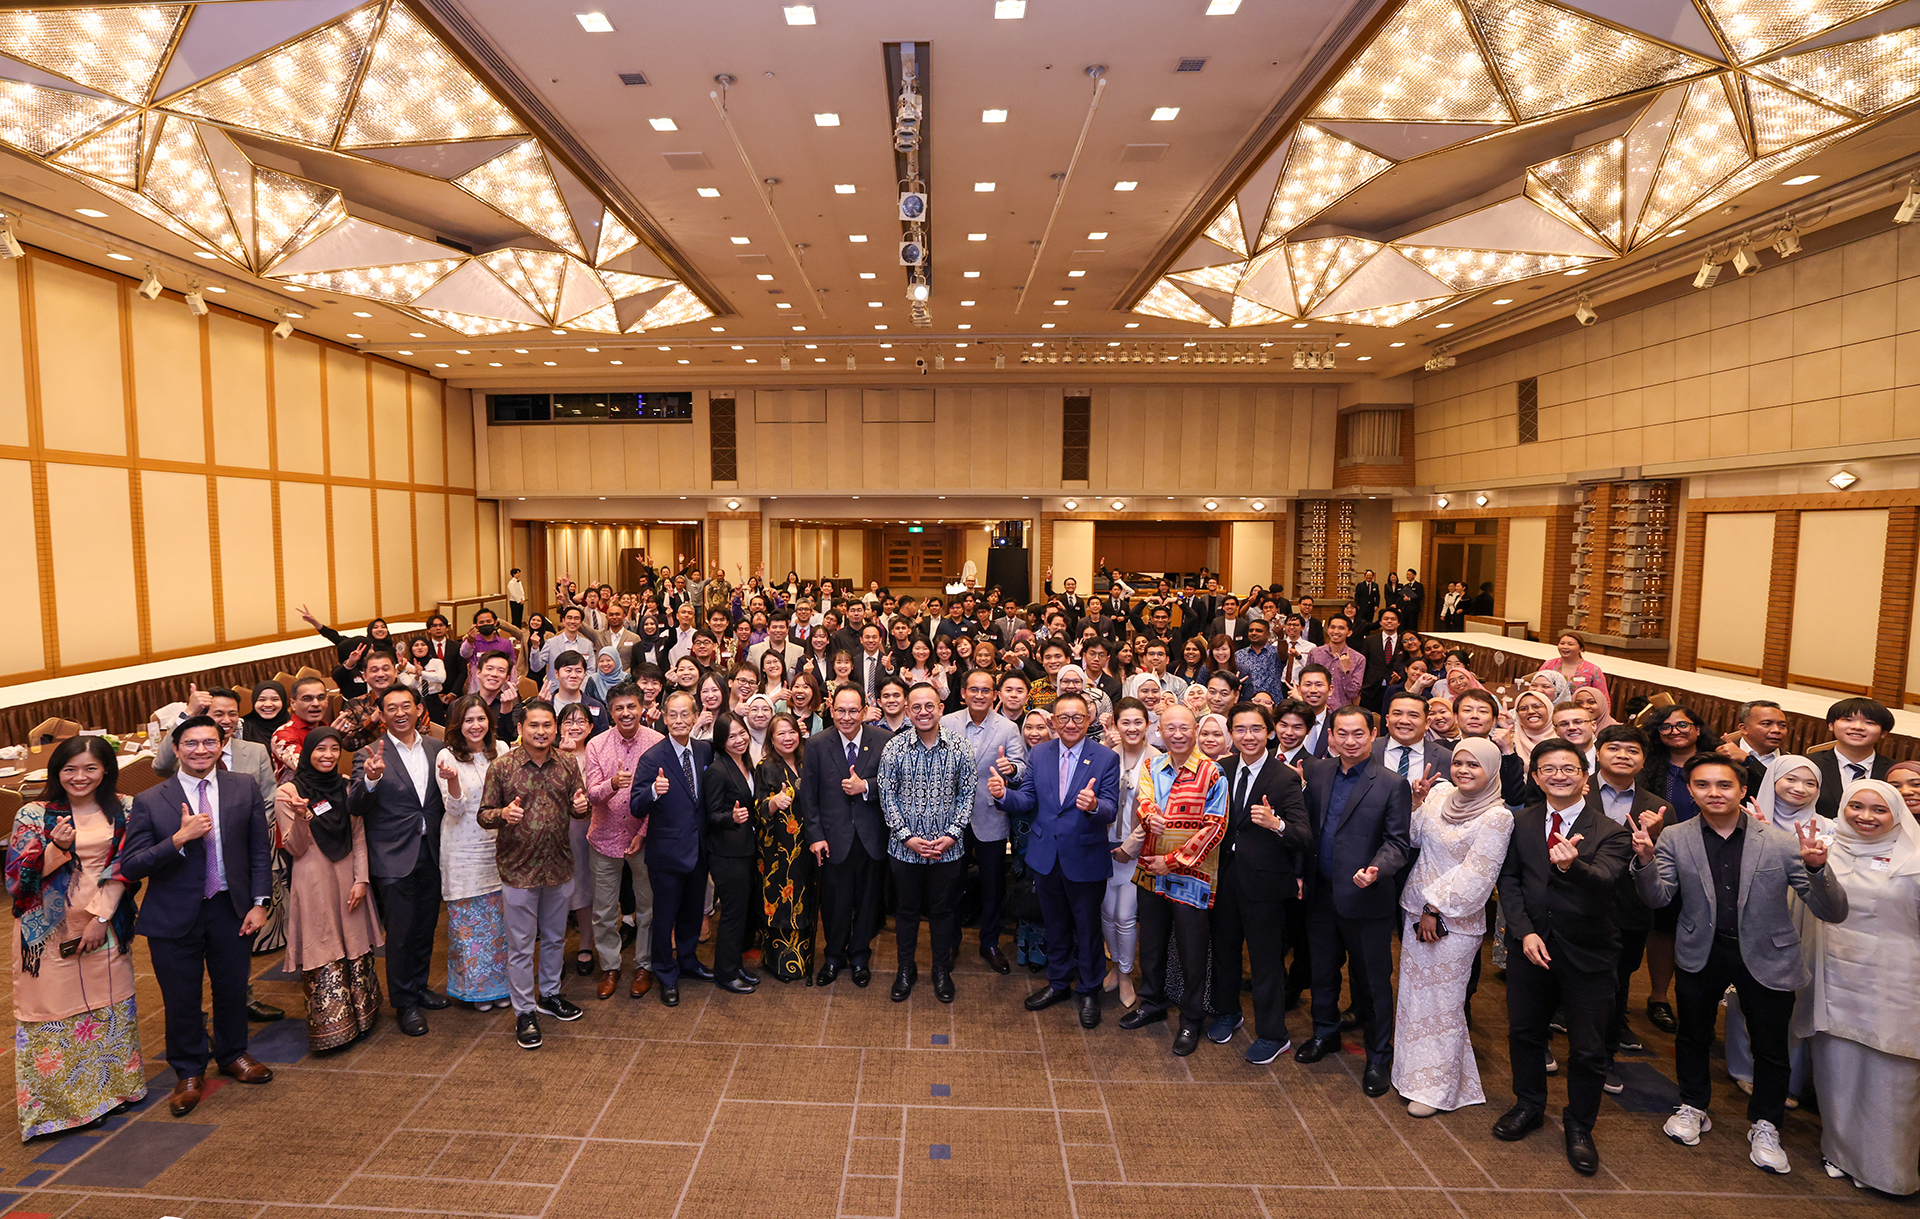 YB Steven Sim Chee Keong, Minister of Human Resources together with Malaysian Community in Japan